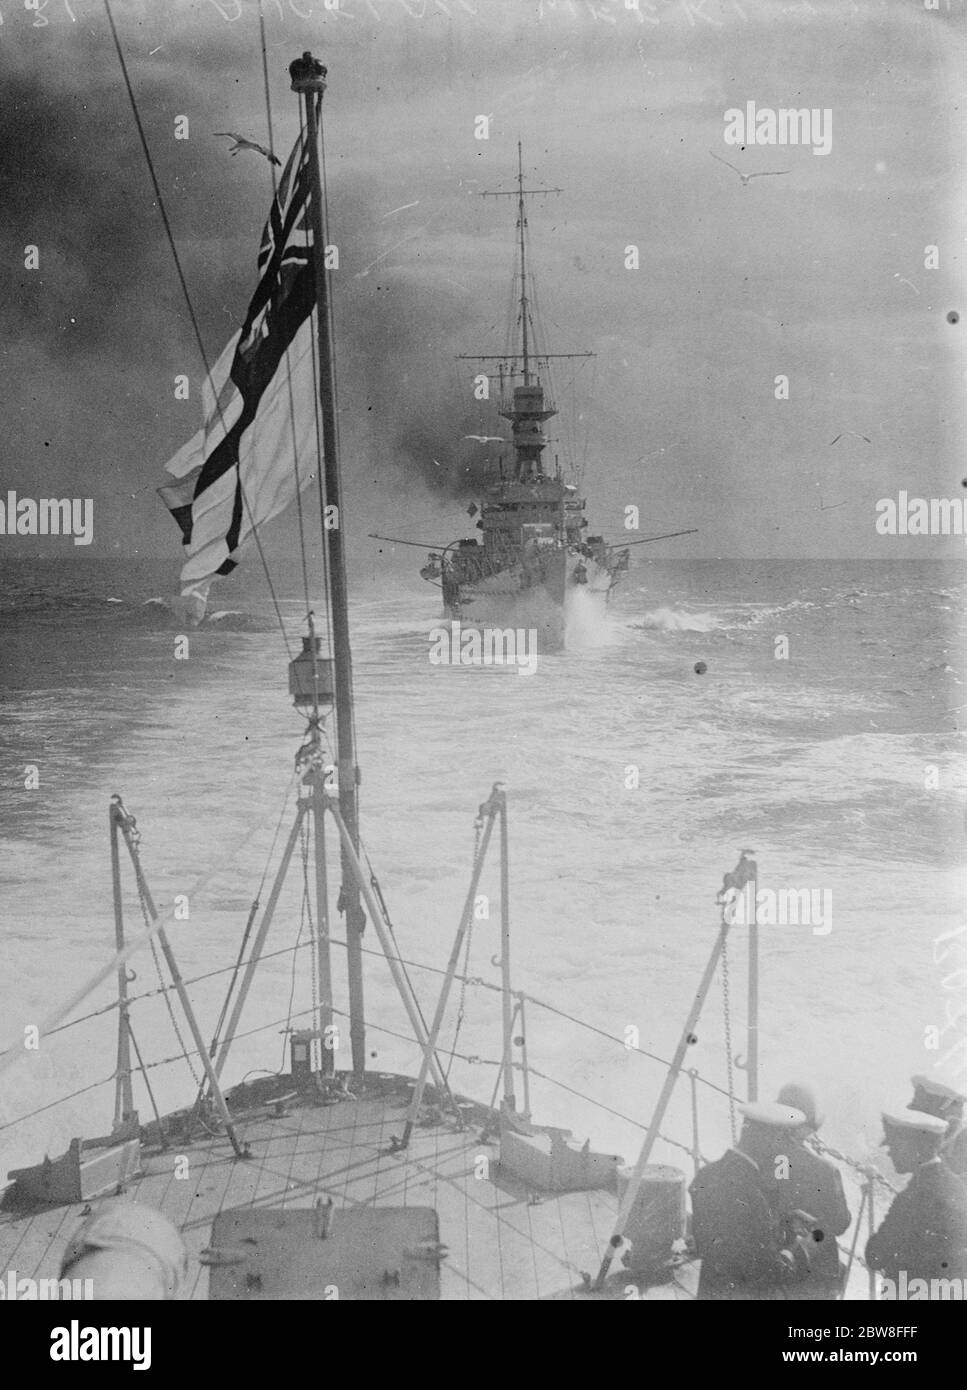 The navy 's work at Hawkes Bay . A unique photograph secured from the stern of the warship HMS Dunedin showing the HMS Dionede travelling full speed to the scene of the disaster . 7 April 1931 Stock Photo